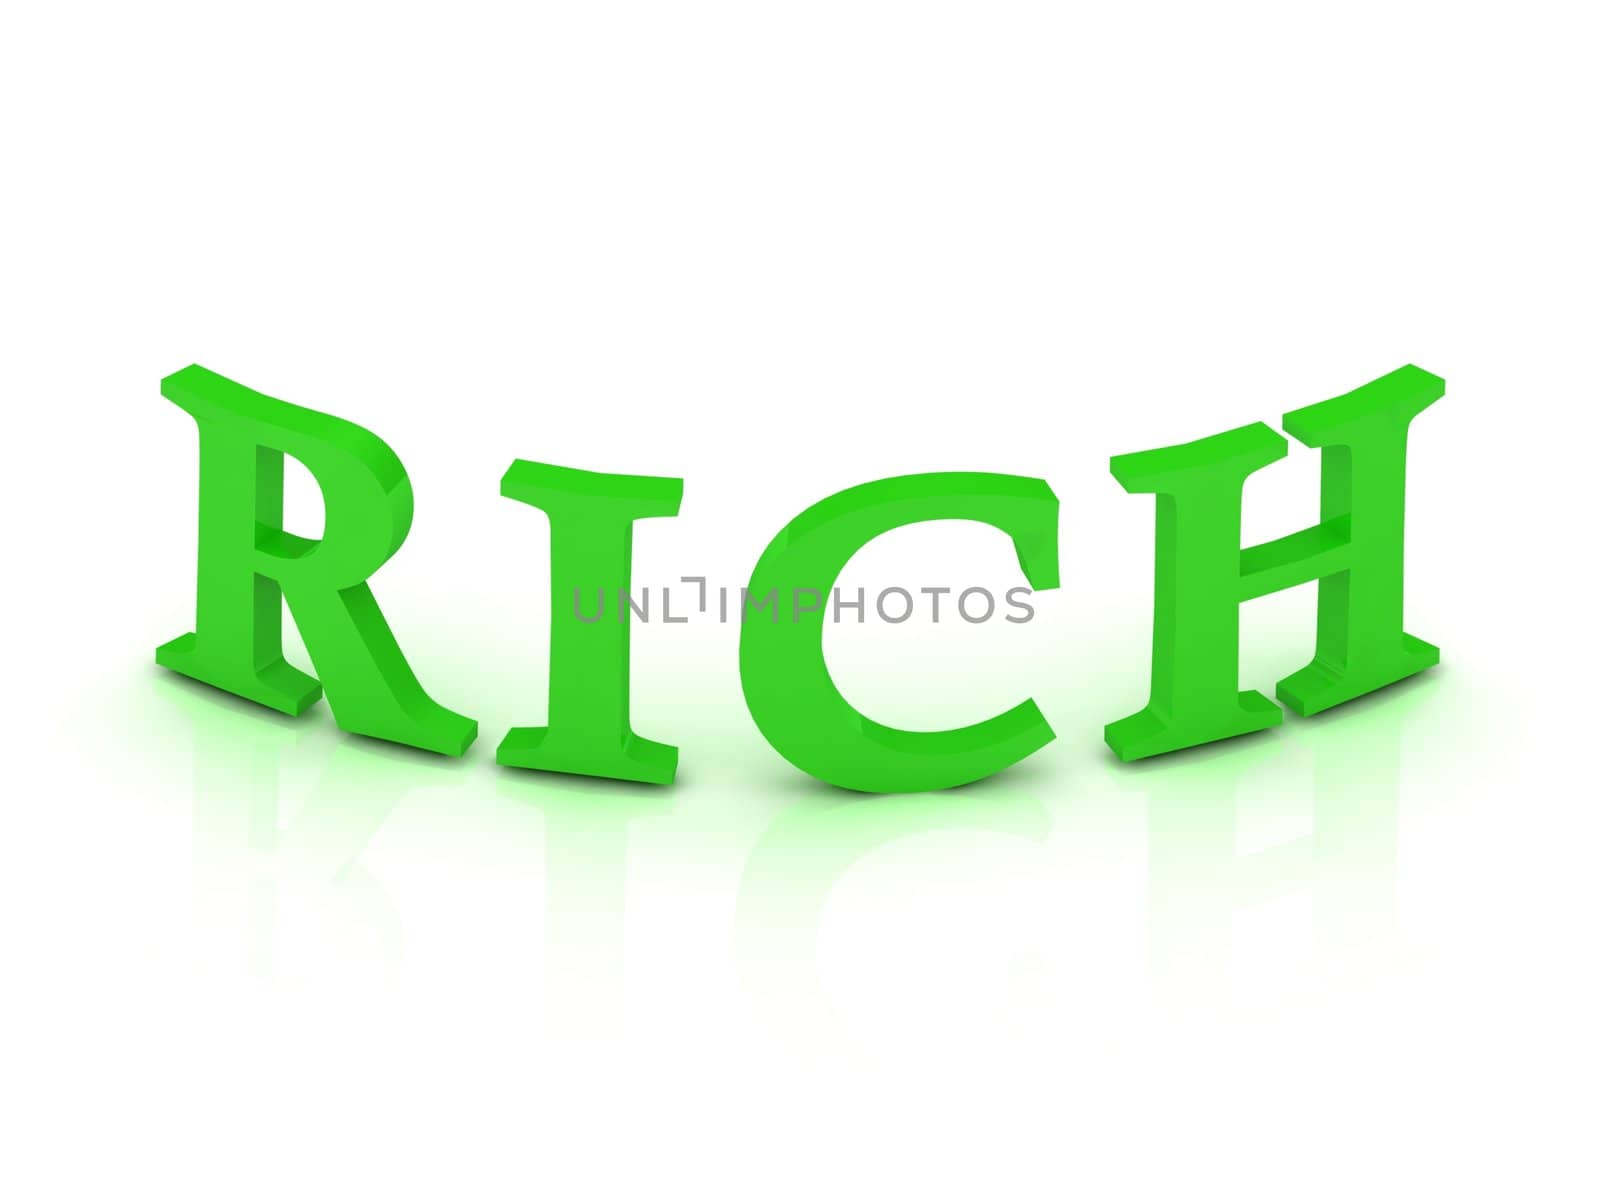 RICH sign with green letters by GreenMost